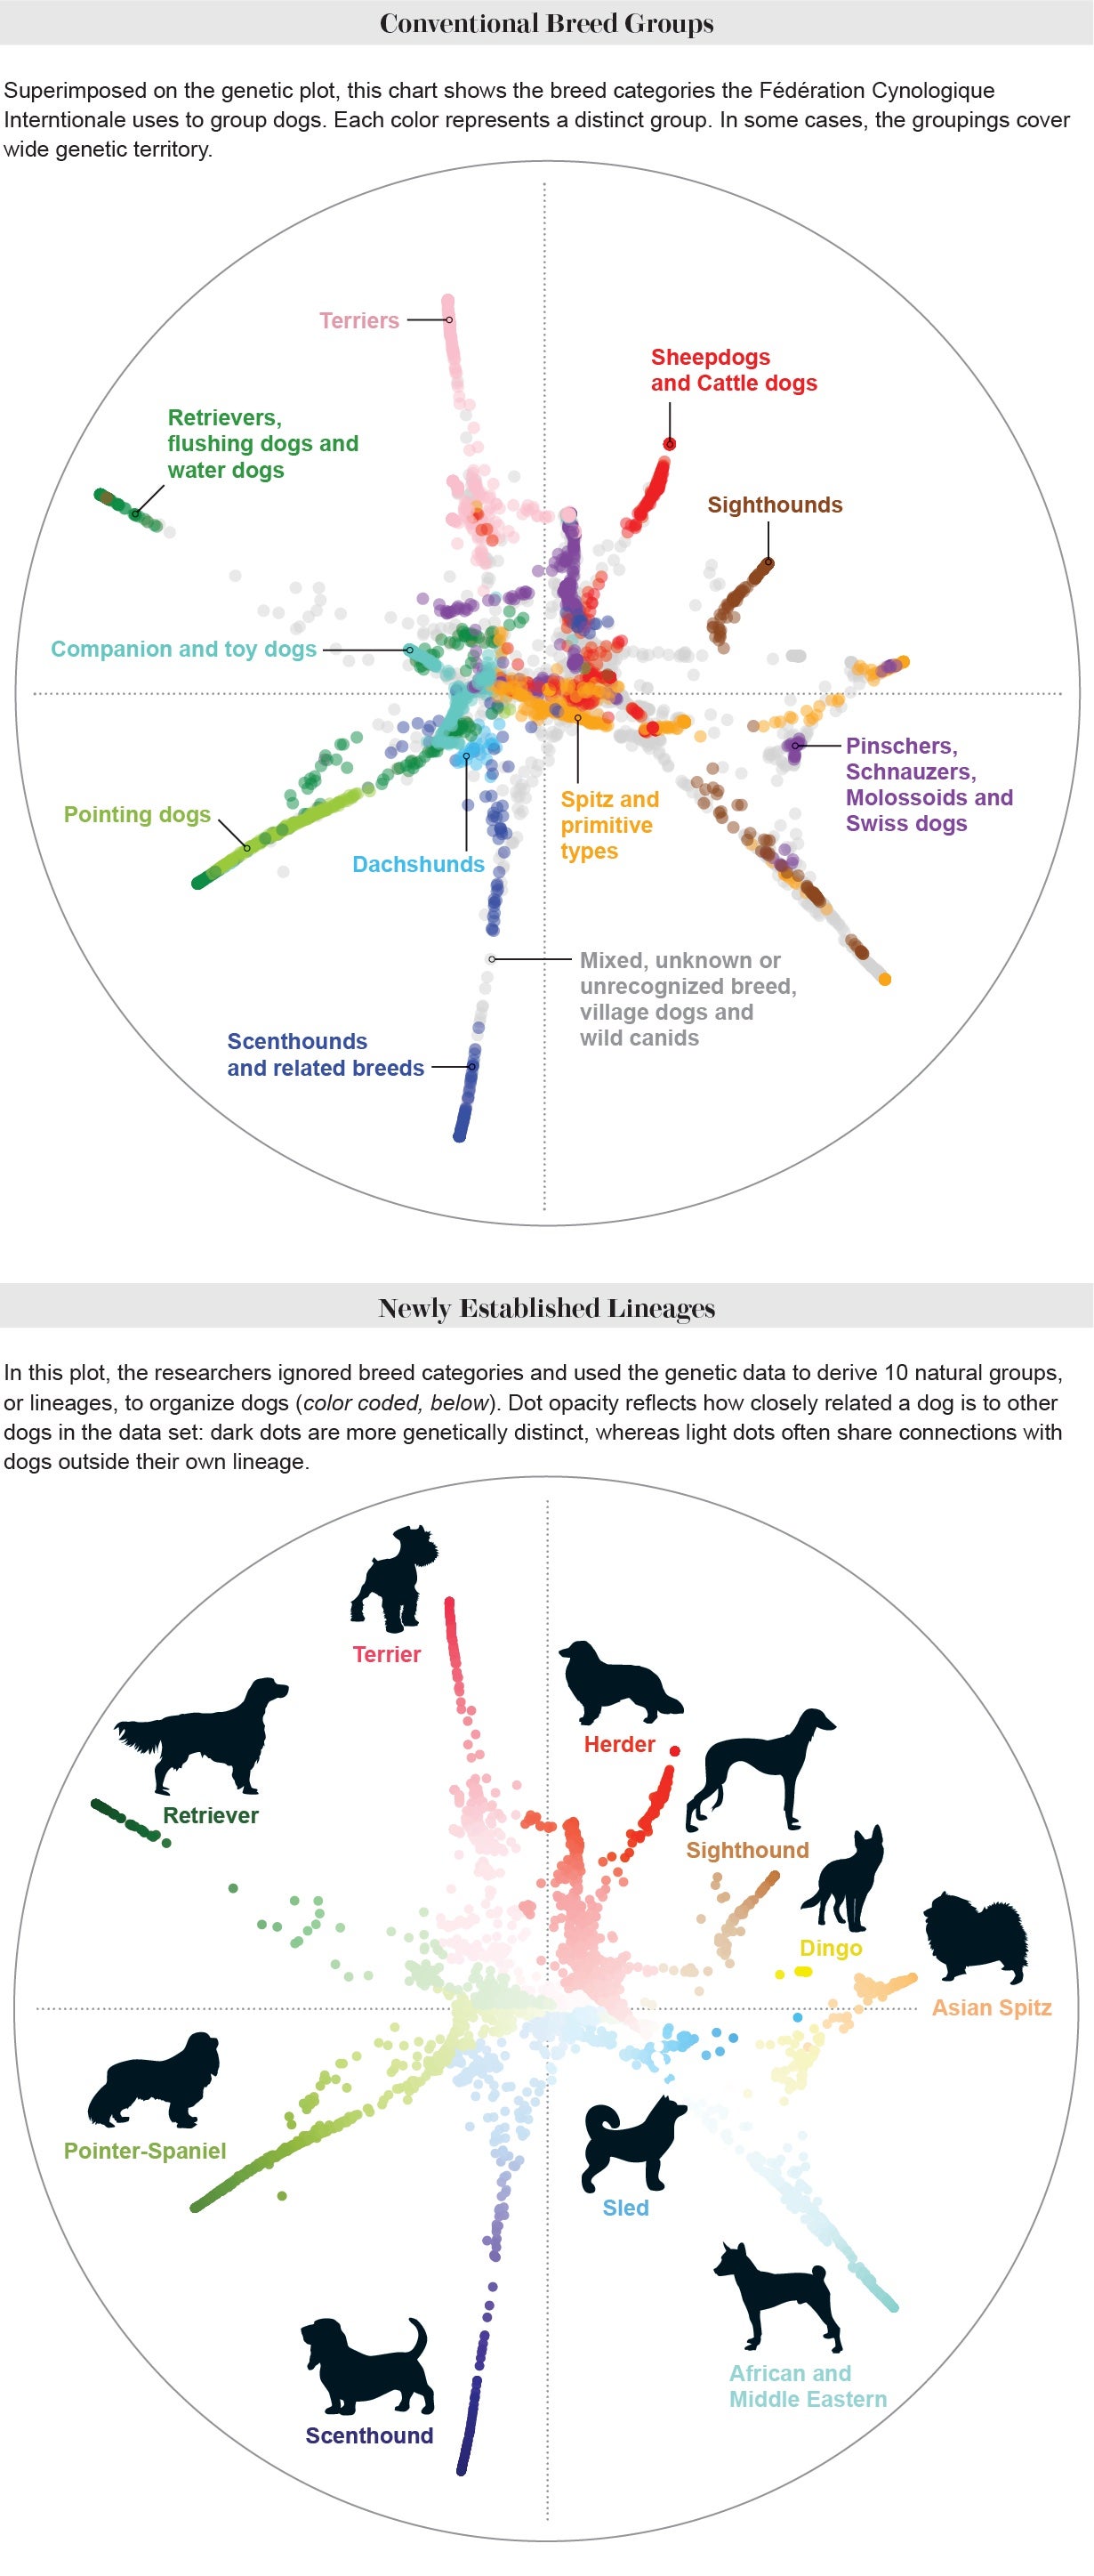 Two scatterplots hold over 4,000 dots each. Each dot represents the genome of a dog. Many dots are clustered in the center, with 10 spoke-like shapes radiating outwards. One is color coded according to conventional breed groups. The other uses color to feature newly established lineages.